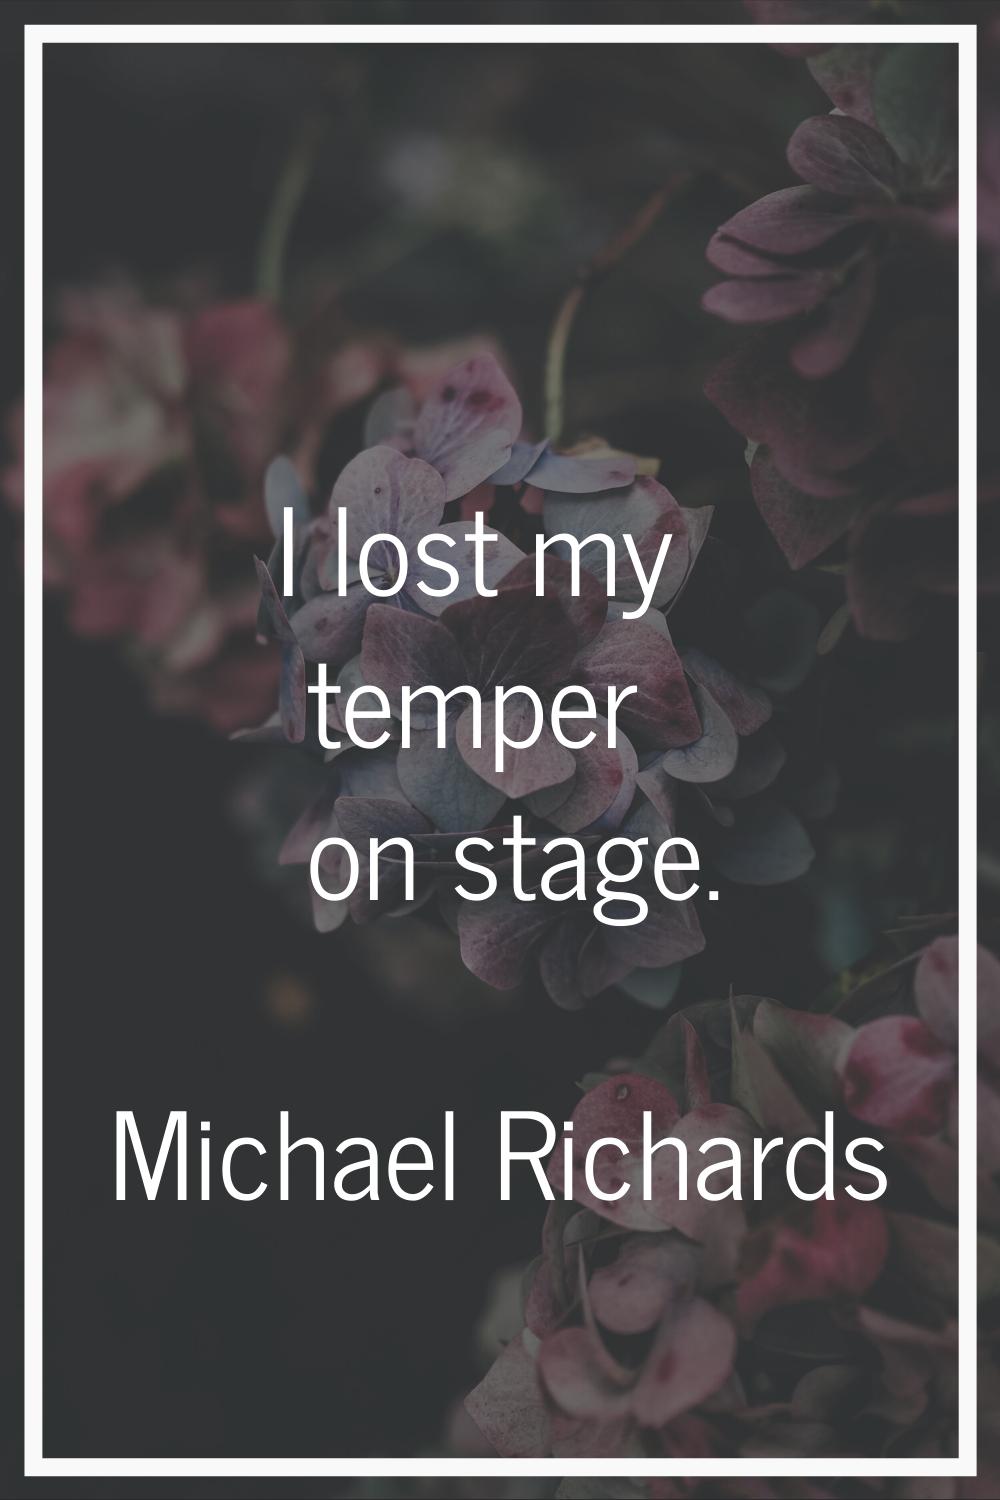 I lost my temper on stage.